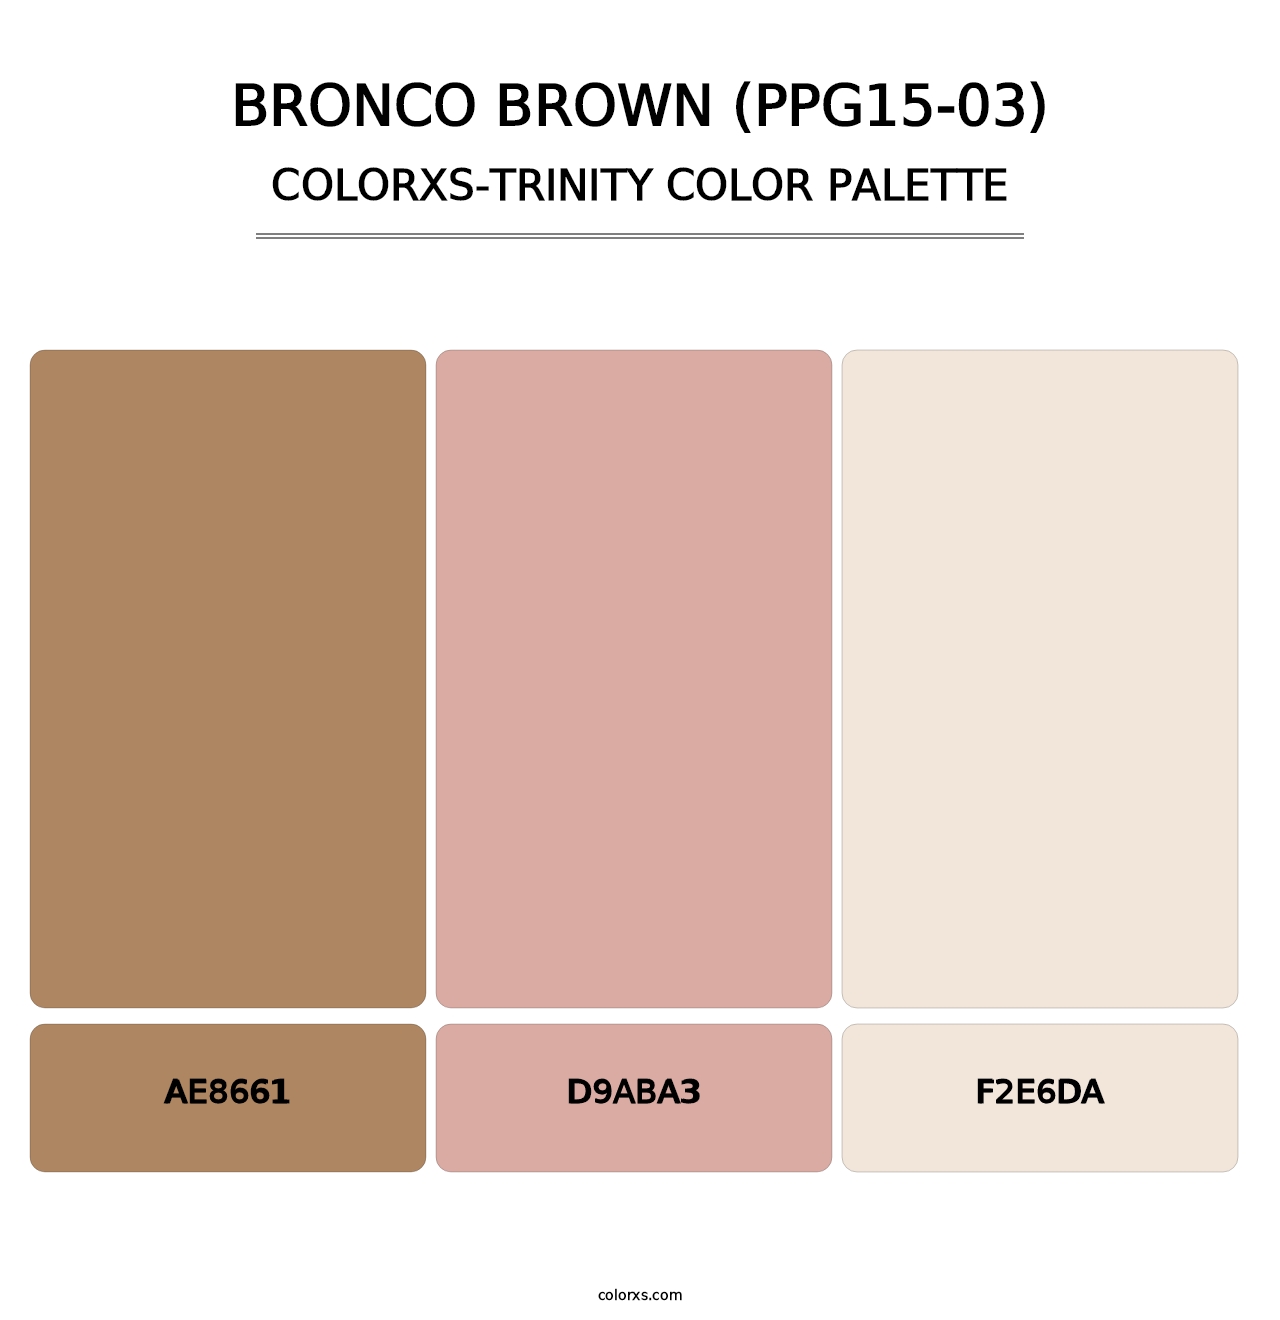 Bronco Brown (PPG15-03) - Colorxs Trinity Palette